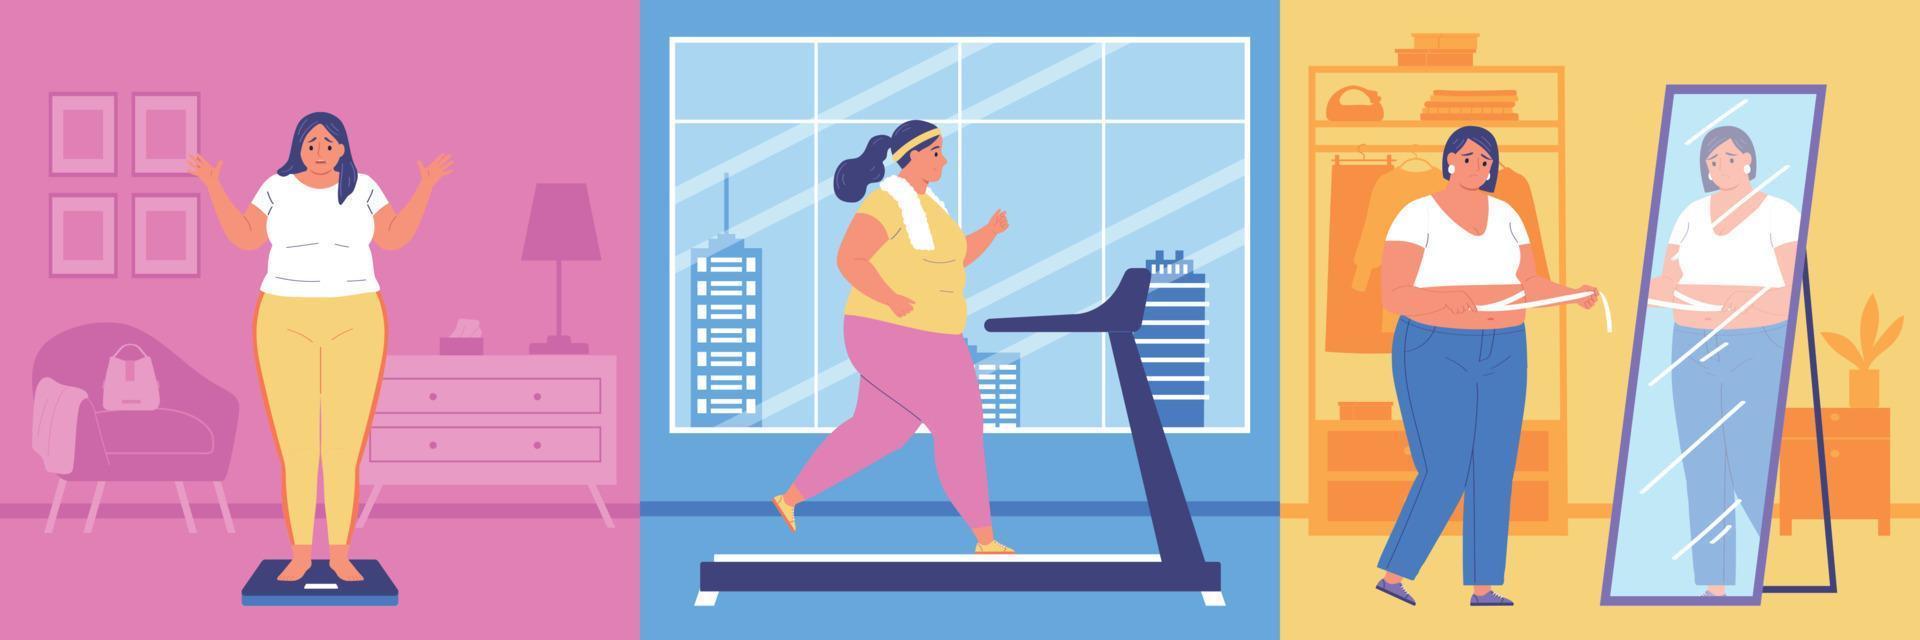 Obese People Flat Compositions vector